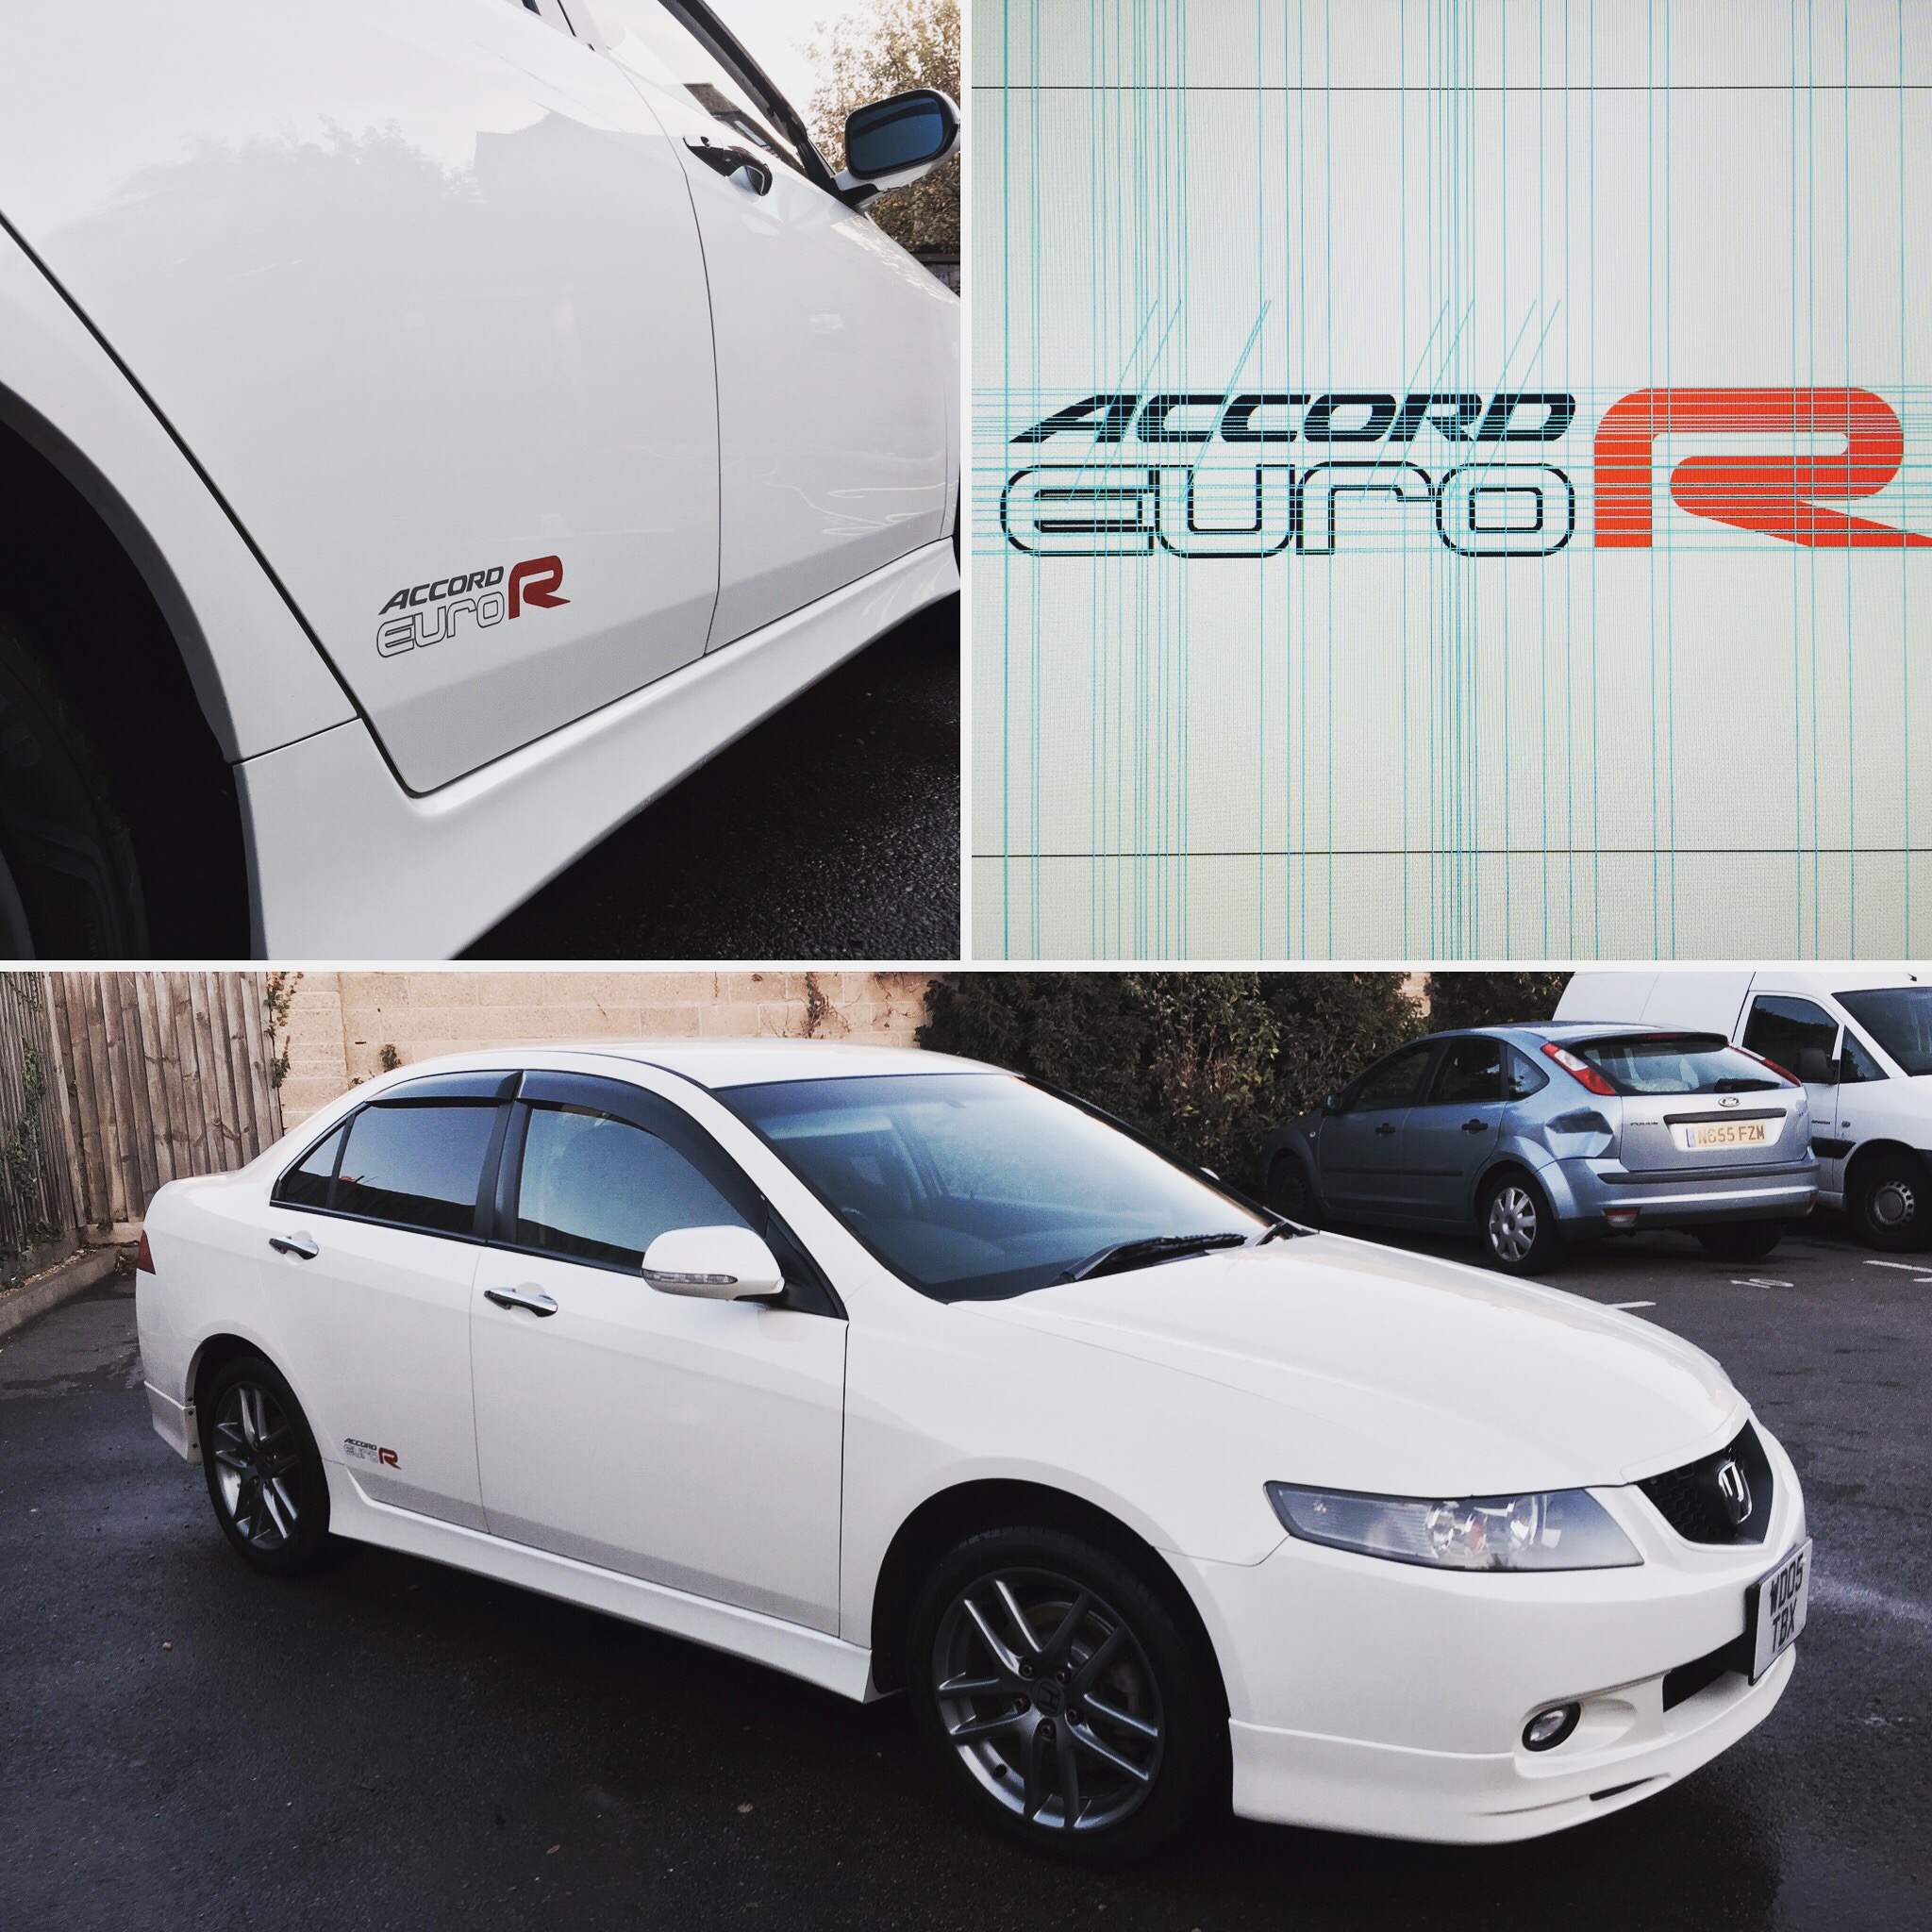 CL7 Accord Euro R (Very pic heavy) - Page 2 - Readers' Cars - PistonHeads